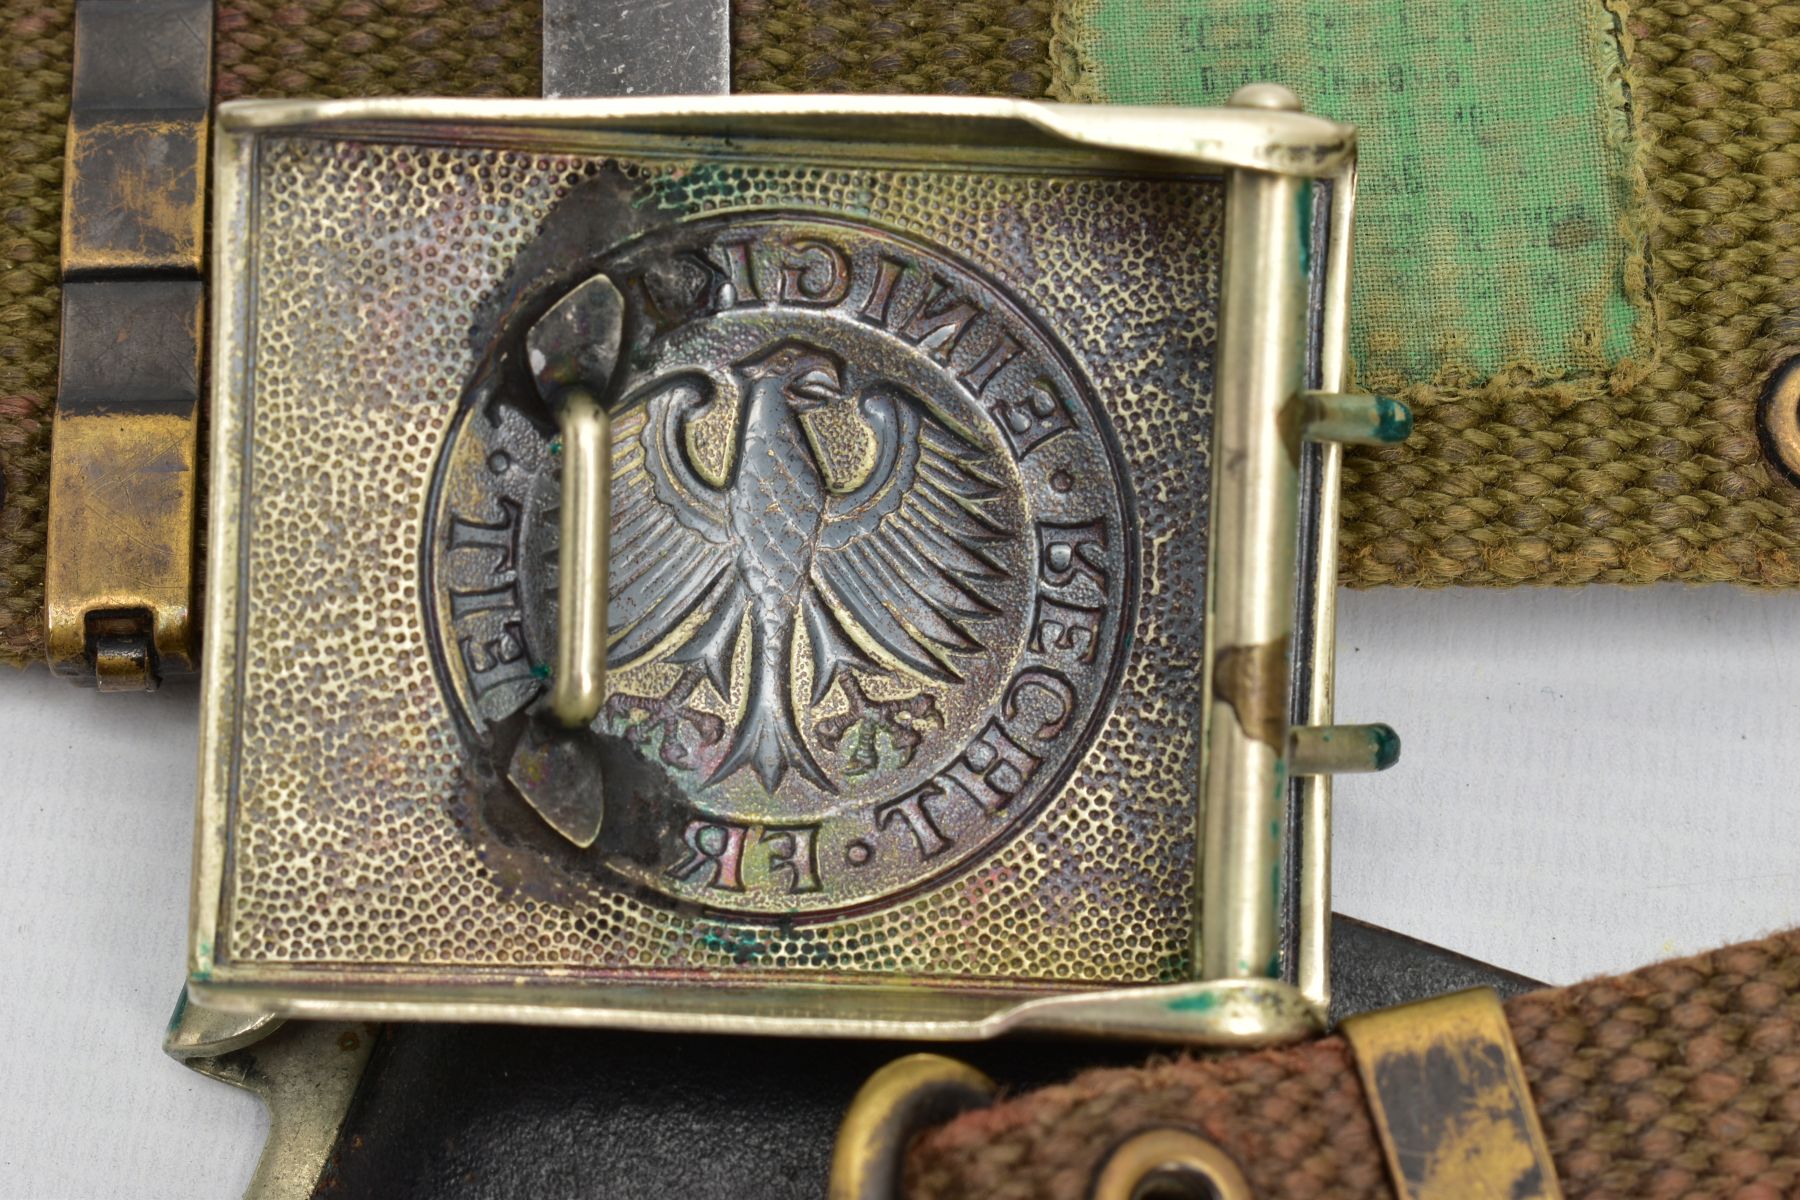 GERMAN POST WWII BUNDESWEHR ARMY BELT BUCKLE, with leather belt, the buckle is one piece face - Image 6 of 8